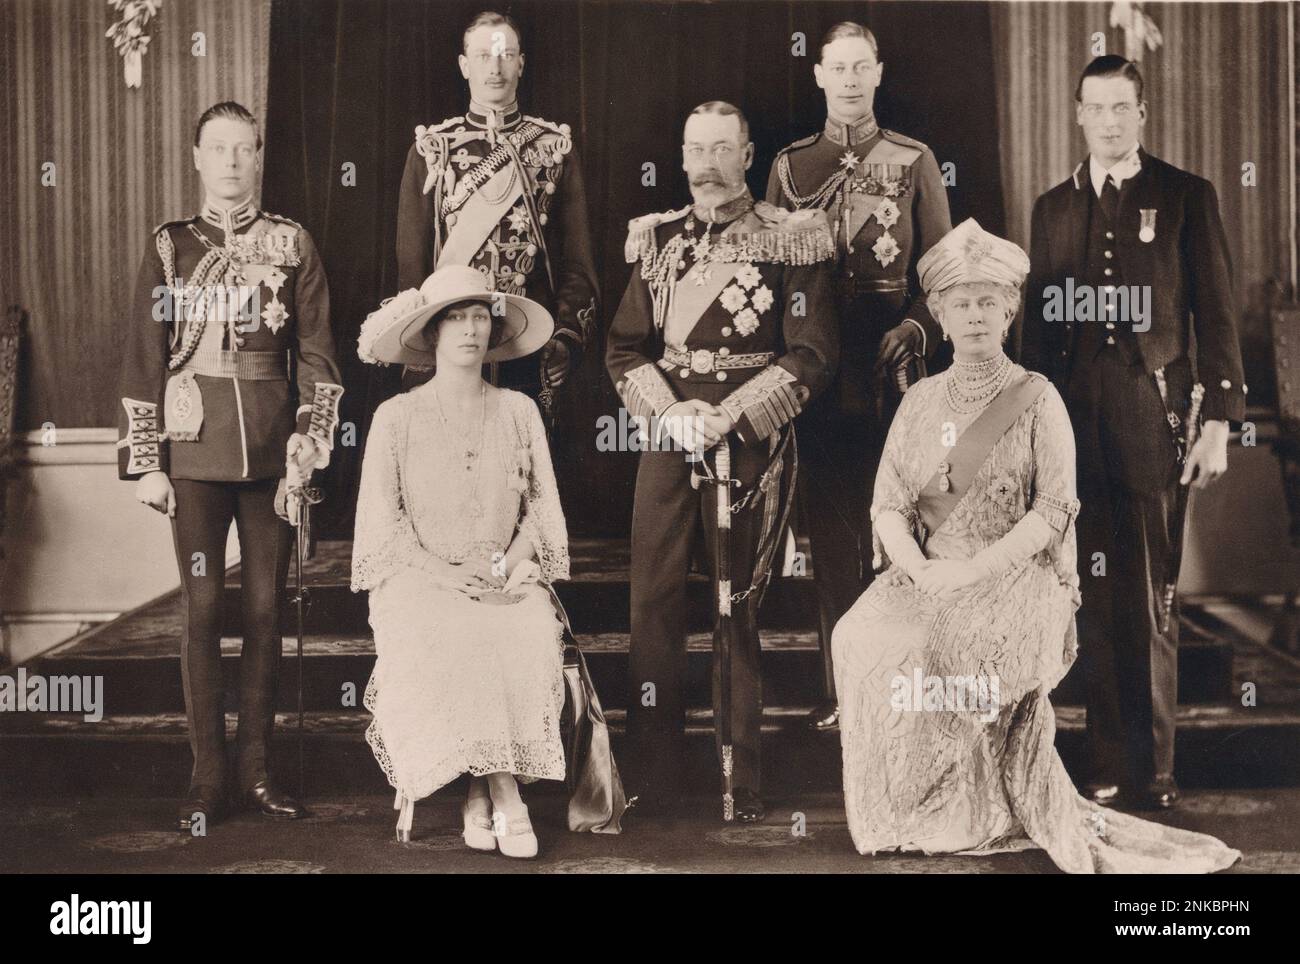 1910 ca. : The  Queen Mary of ENGLAND ( Princesse of Teck , 1867 - 1953 ) , Empress of U. K. the  husband  King GEORGE V ( Prince of Wales ,  1865 - 1936 ) . In this photo with ( from left to right ) son  Edward ( future King EDWARD VIII , 1894 - 1972 ), the daugther princesse MARY ( married to Earl Henry Lascelles , Countess of Harewood , 1897 - 1965 ), the son HENRY ( 1900 - 1974 ), the son ALBERT Duke of York ( future King GEORGE VI , 1895 - 1952 ) and the son prince GEORGE of KENT ( 1902 - 1942 ). Photo by  Bassano , London    - family - famiglia - figli - figlio - re  - ritratto - portrai Stock Photo